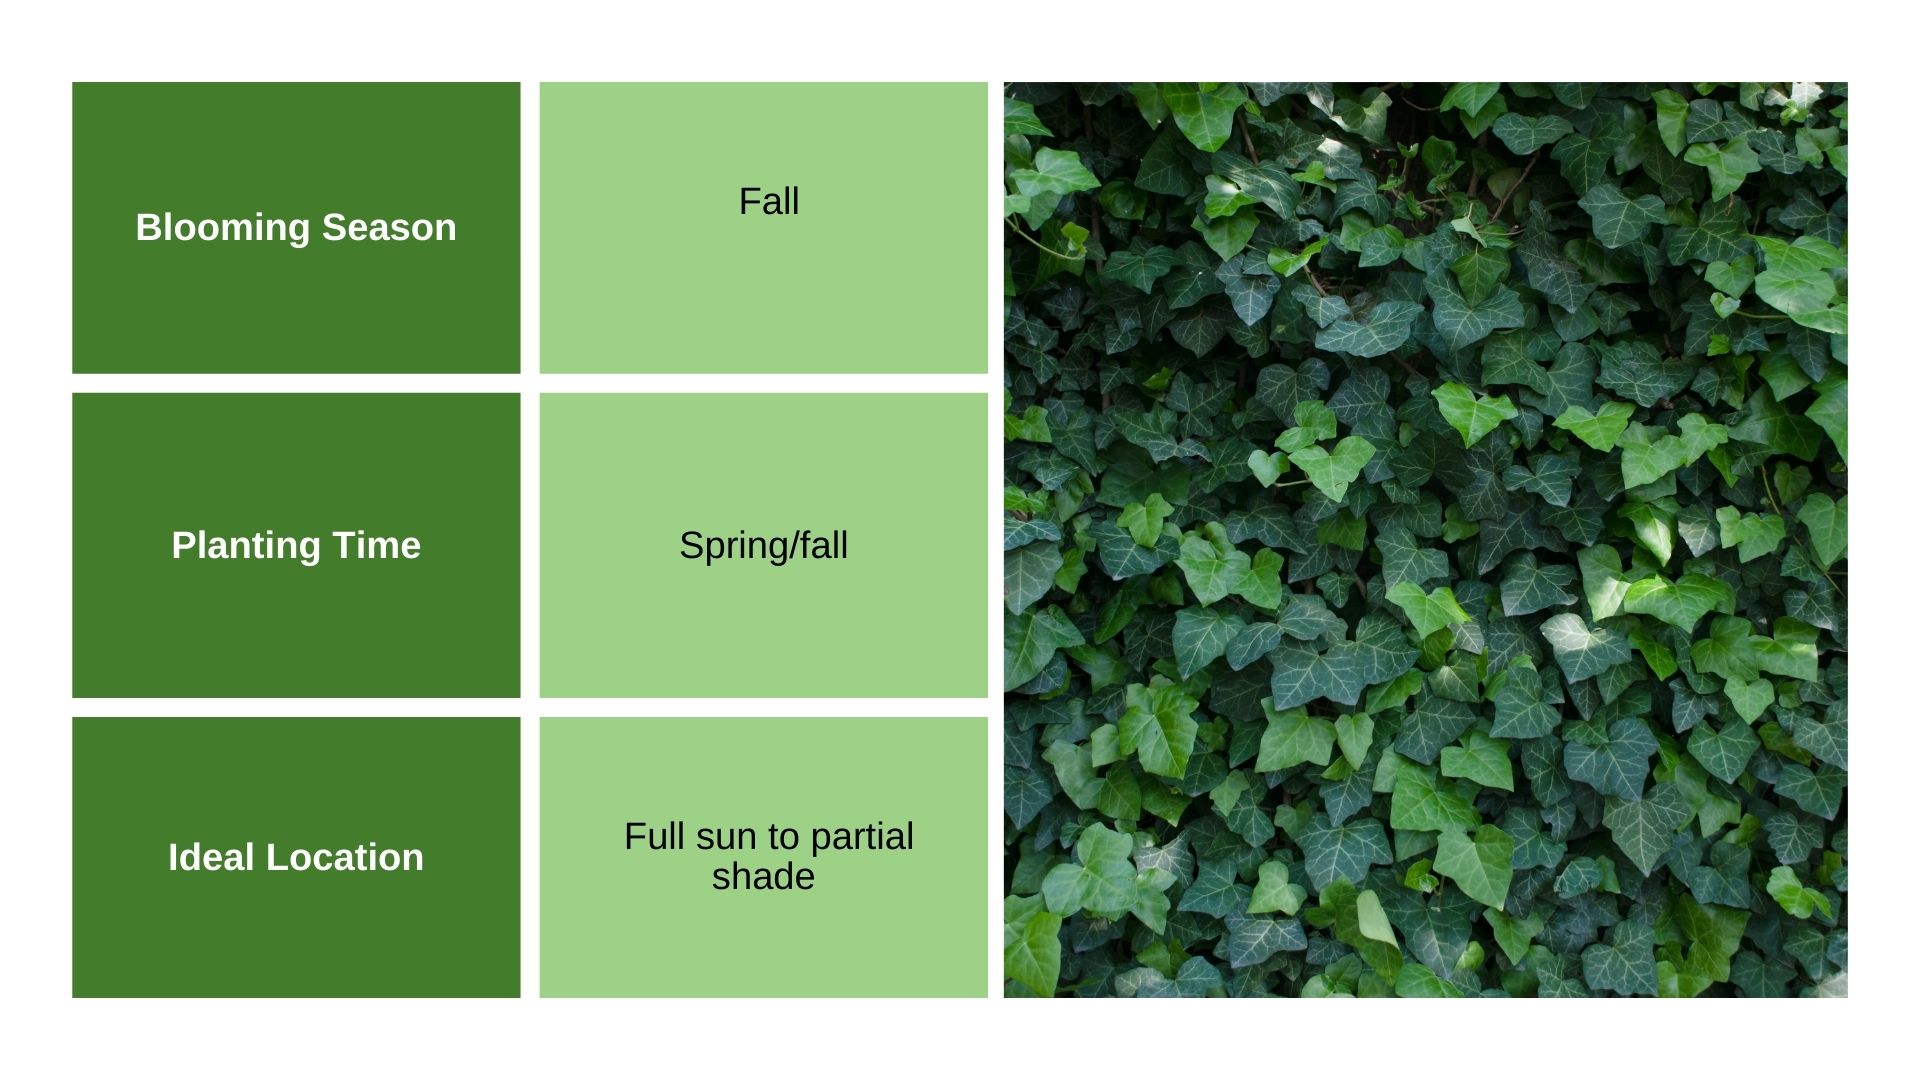 _Ivy info chart and plant photo